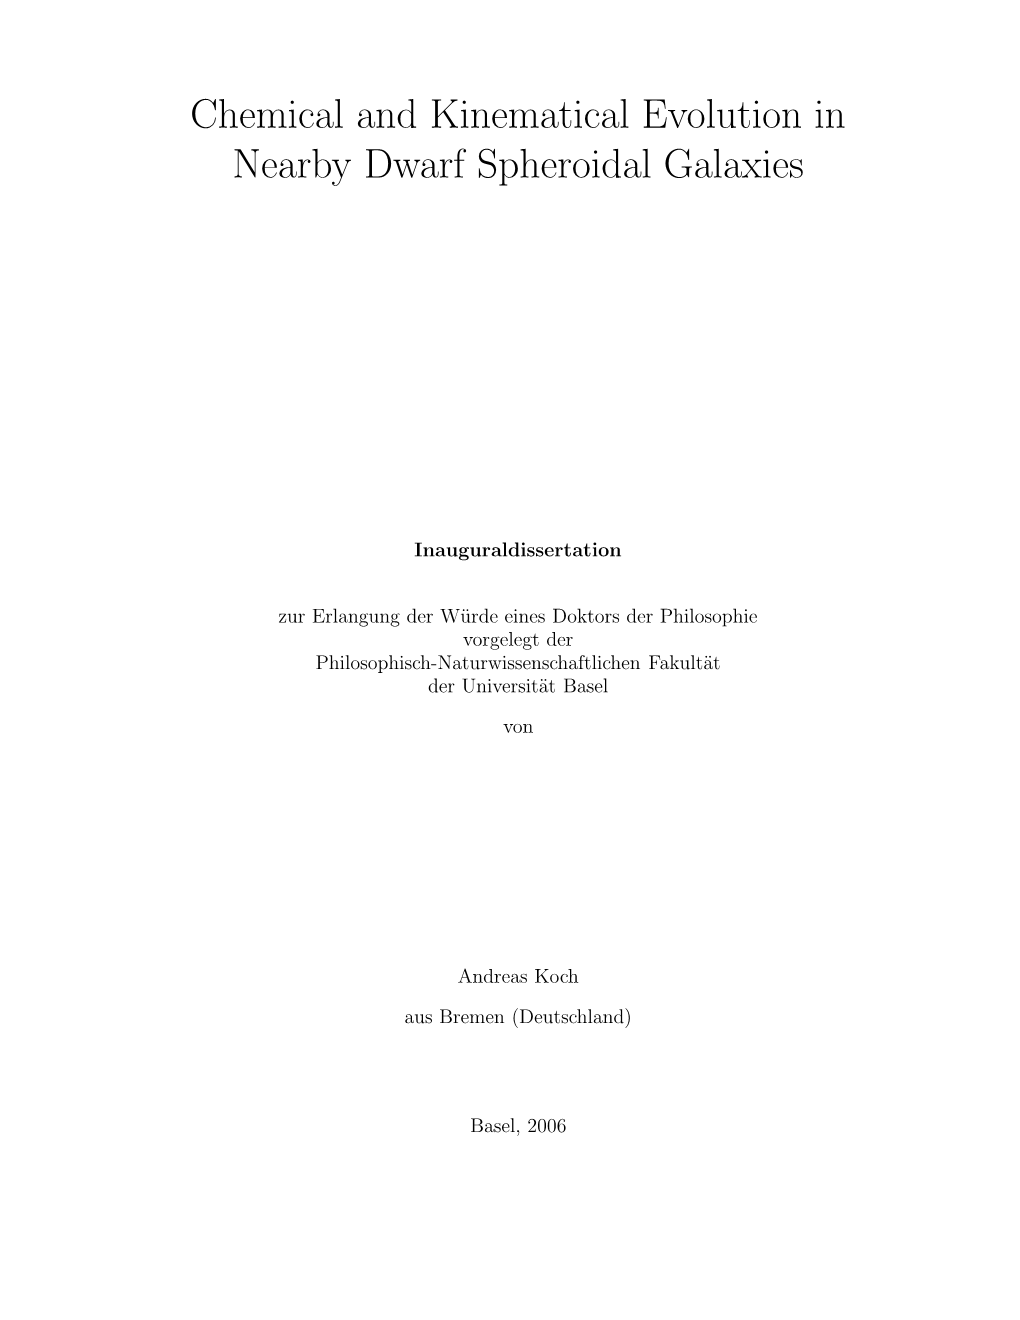 Chemical and Kinematical Evolution in Nearby Dwarf Spheroidal Galaxies